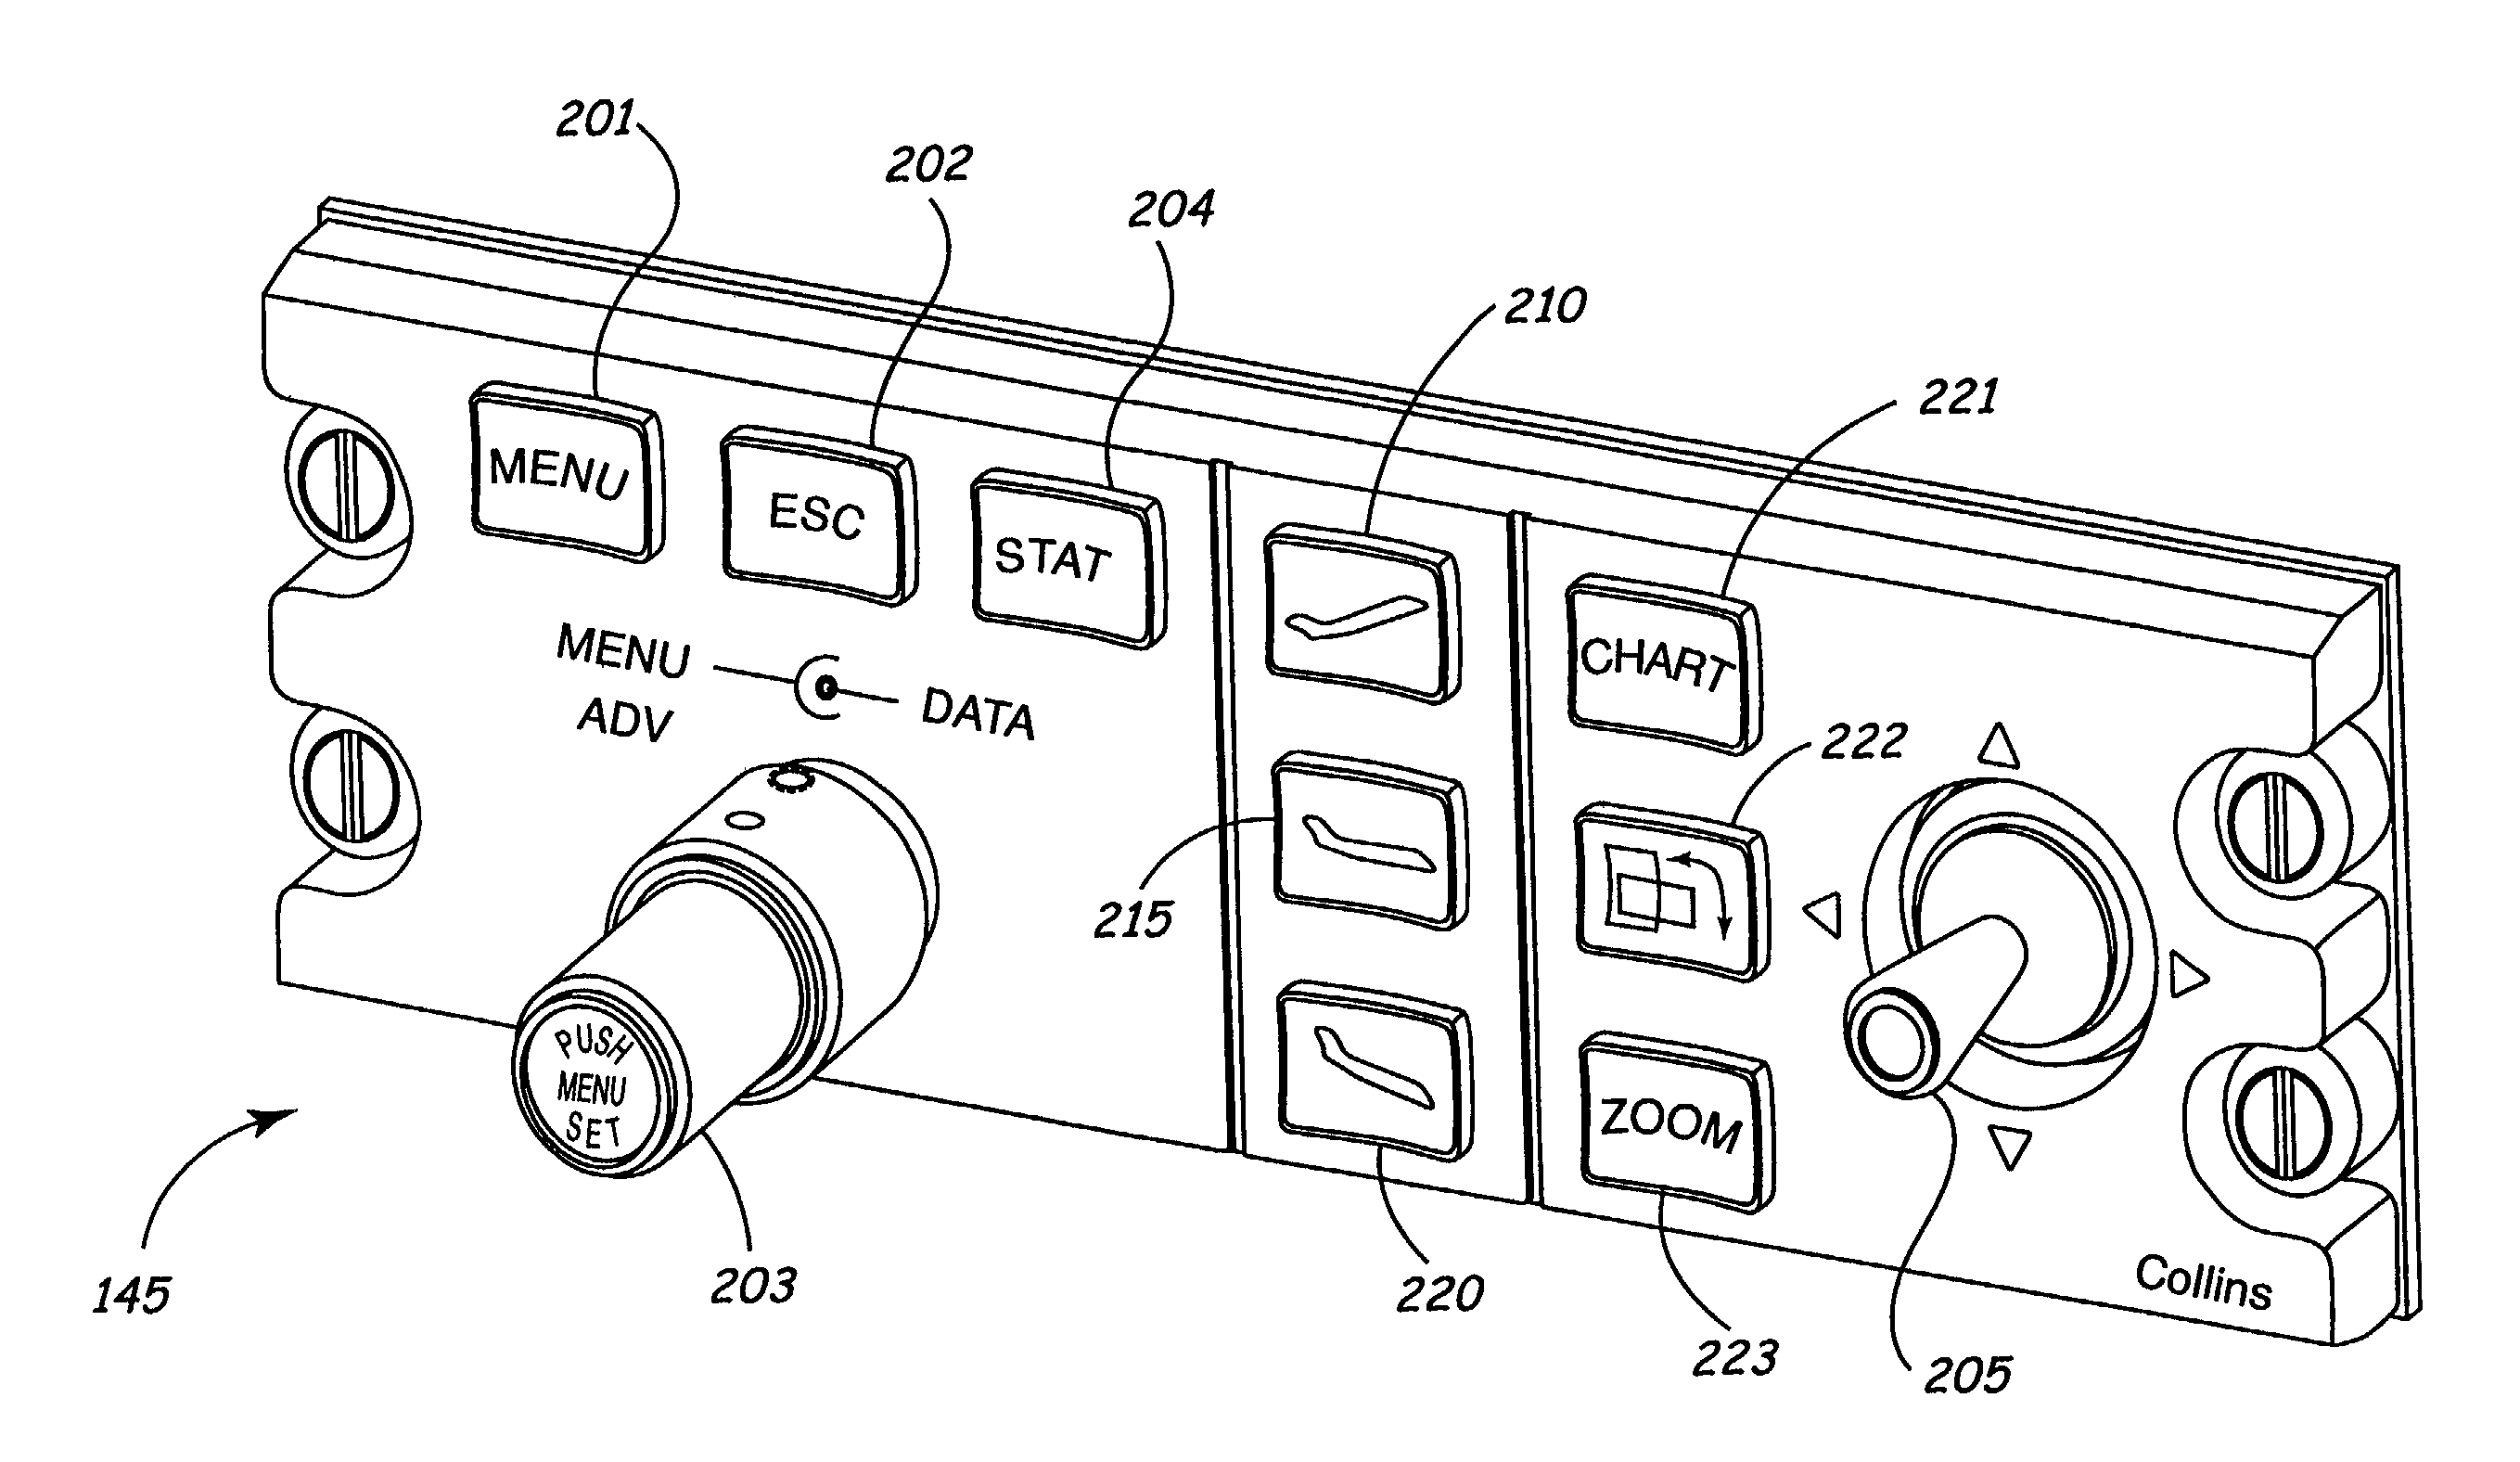 Avionics display system for memorization of display configuration to phase of flight pushbuttons